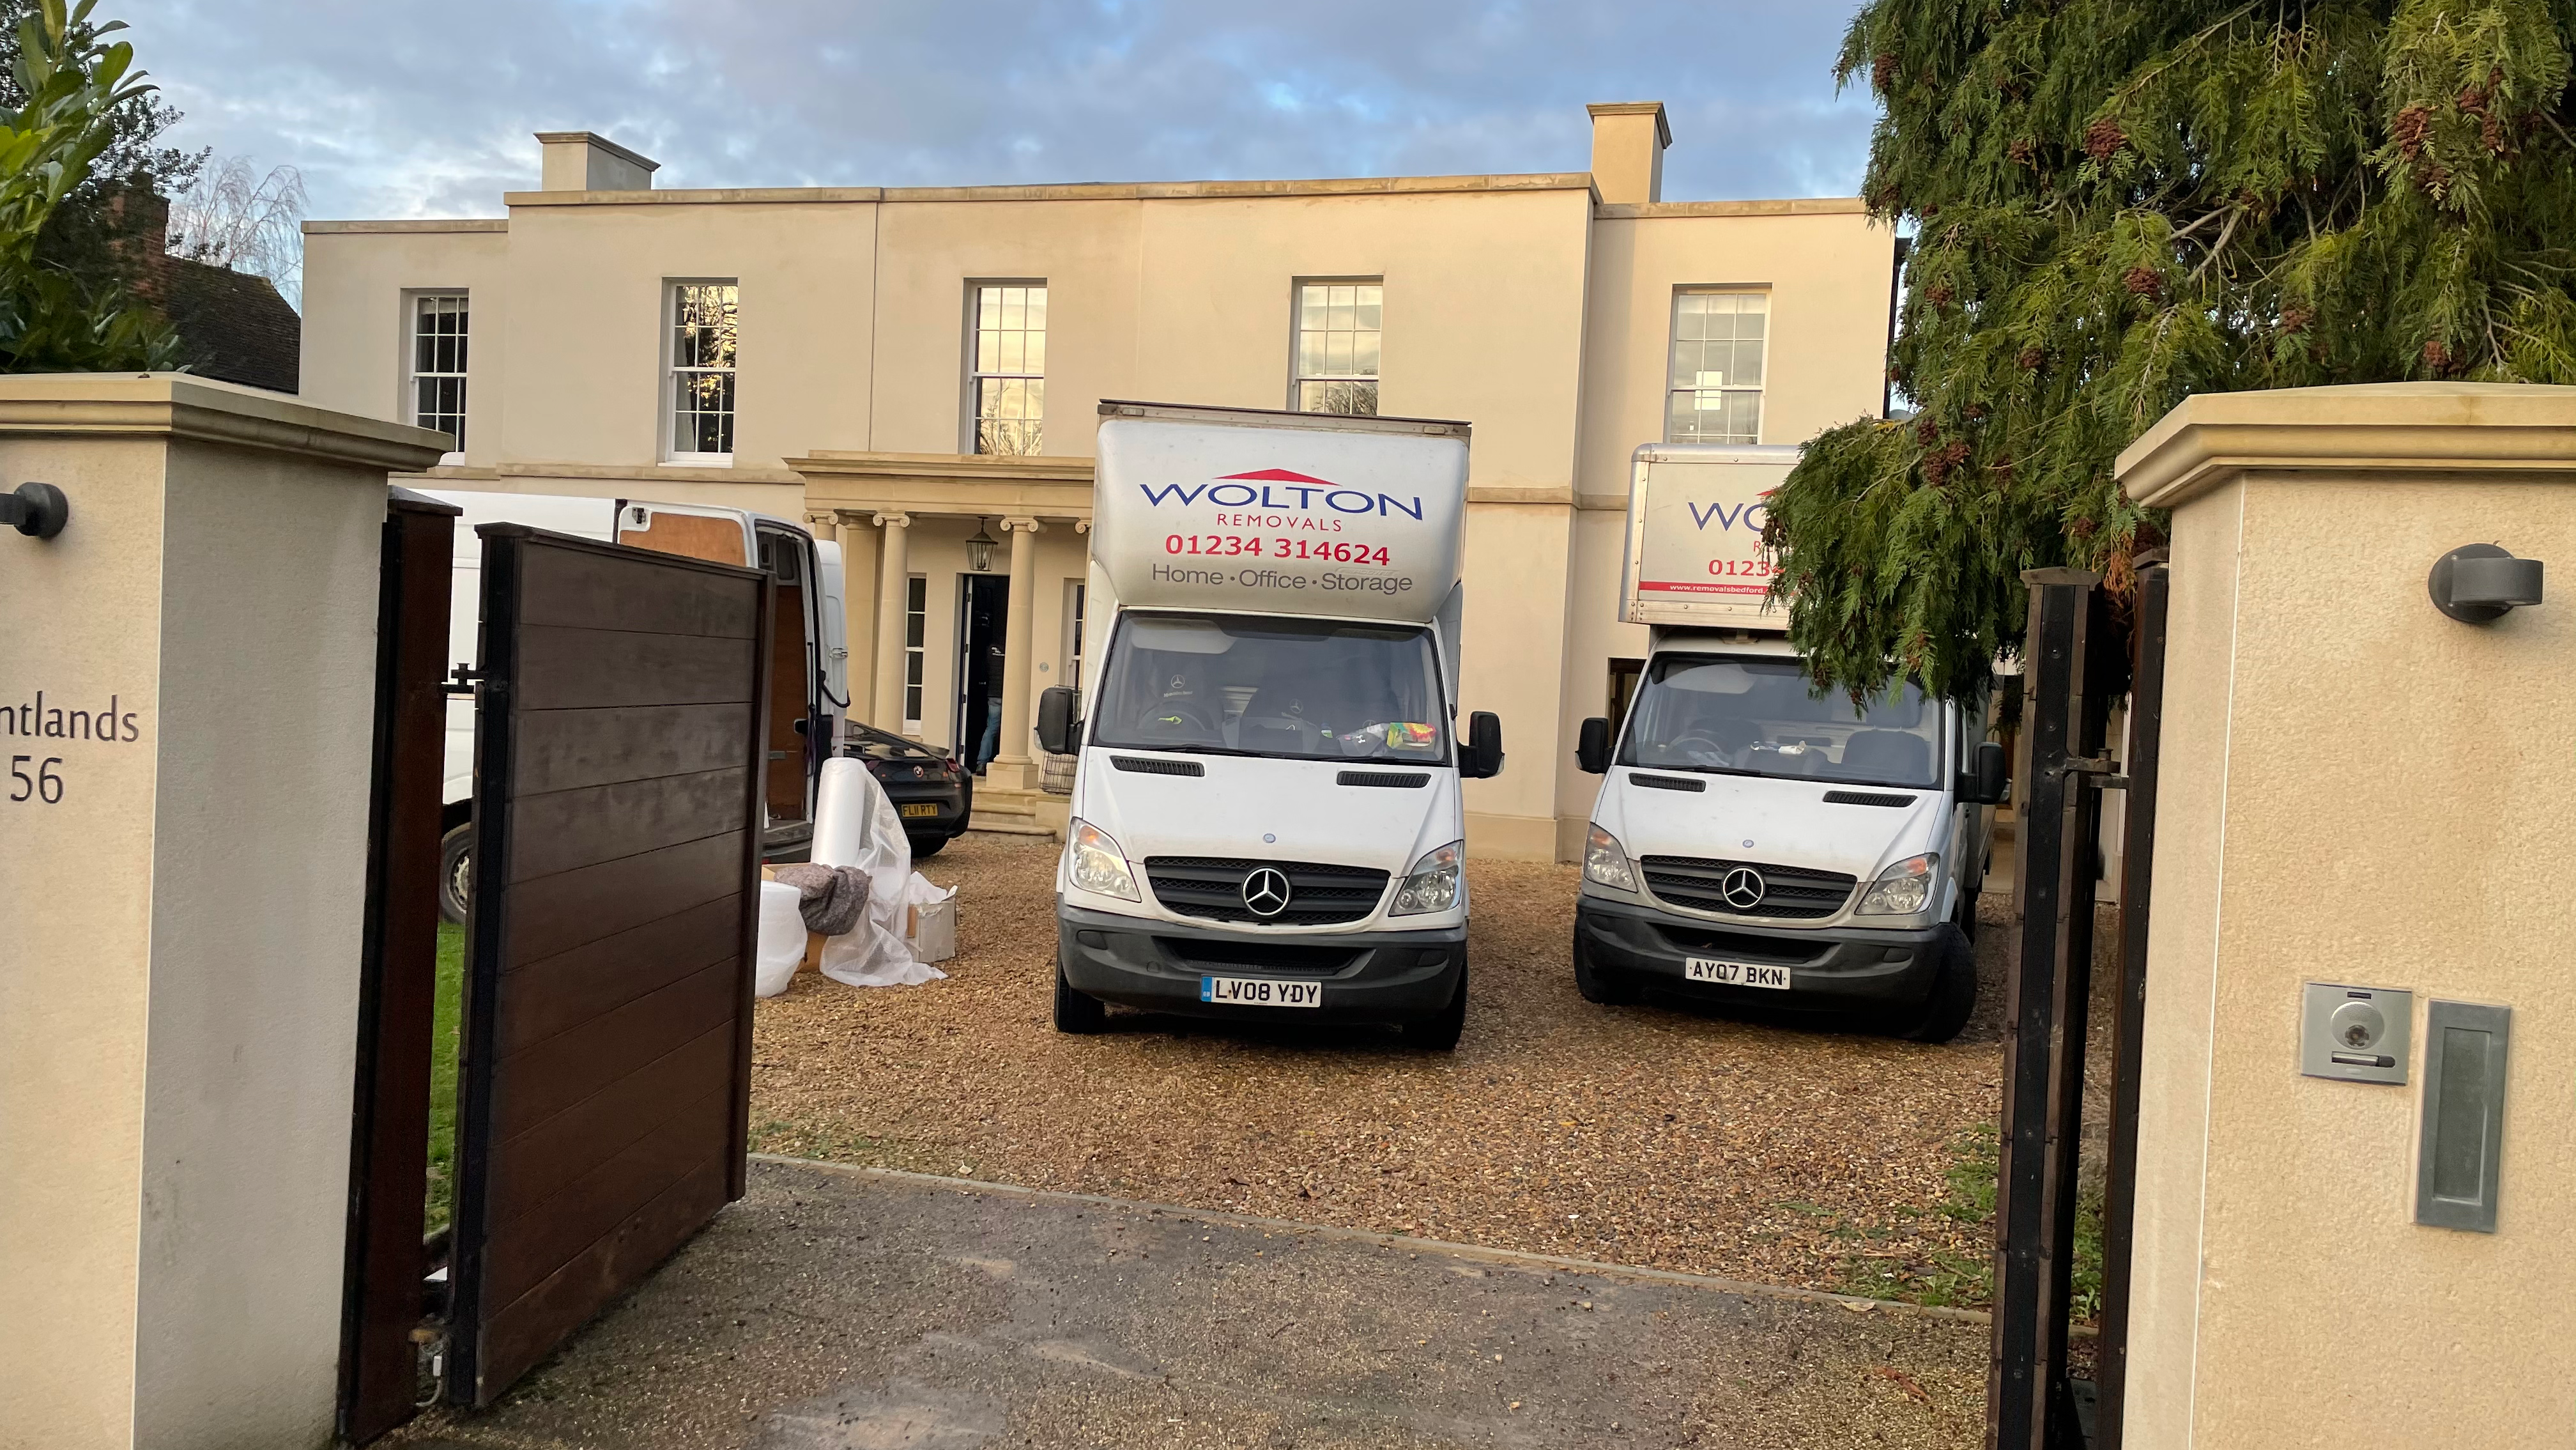 Wolton Removals - Bedford Moving Company Best Movers in Bedford